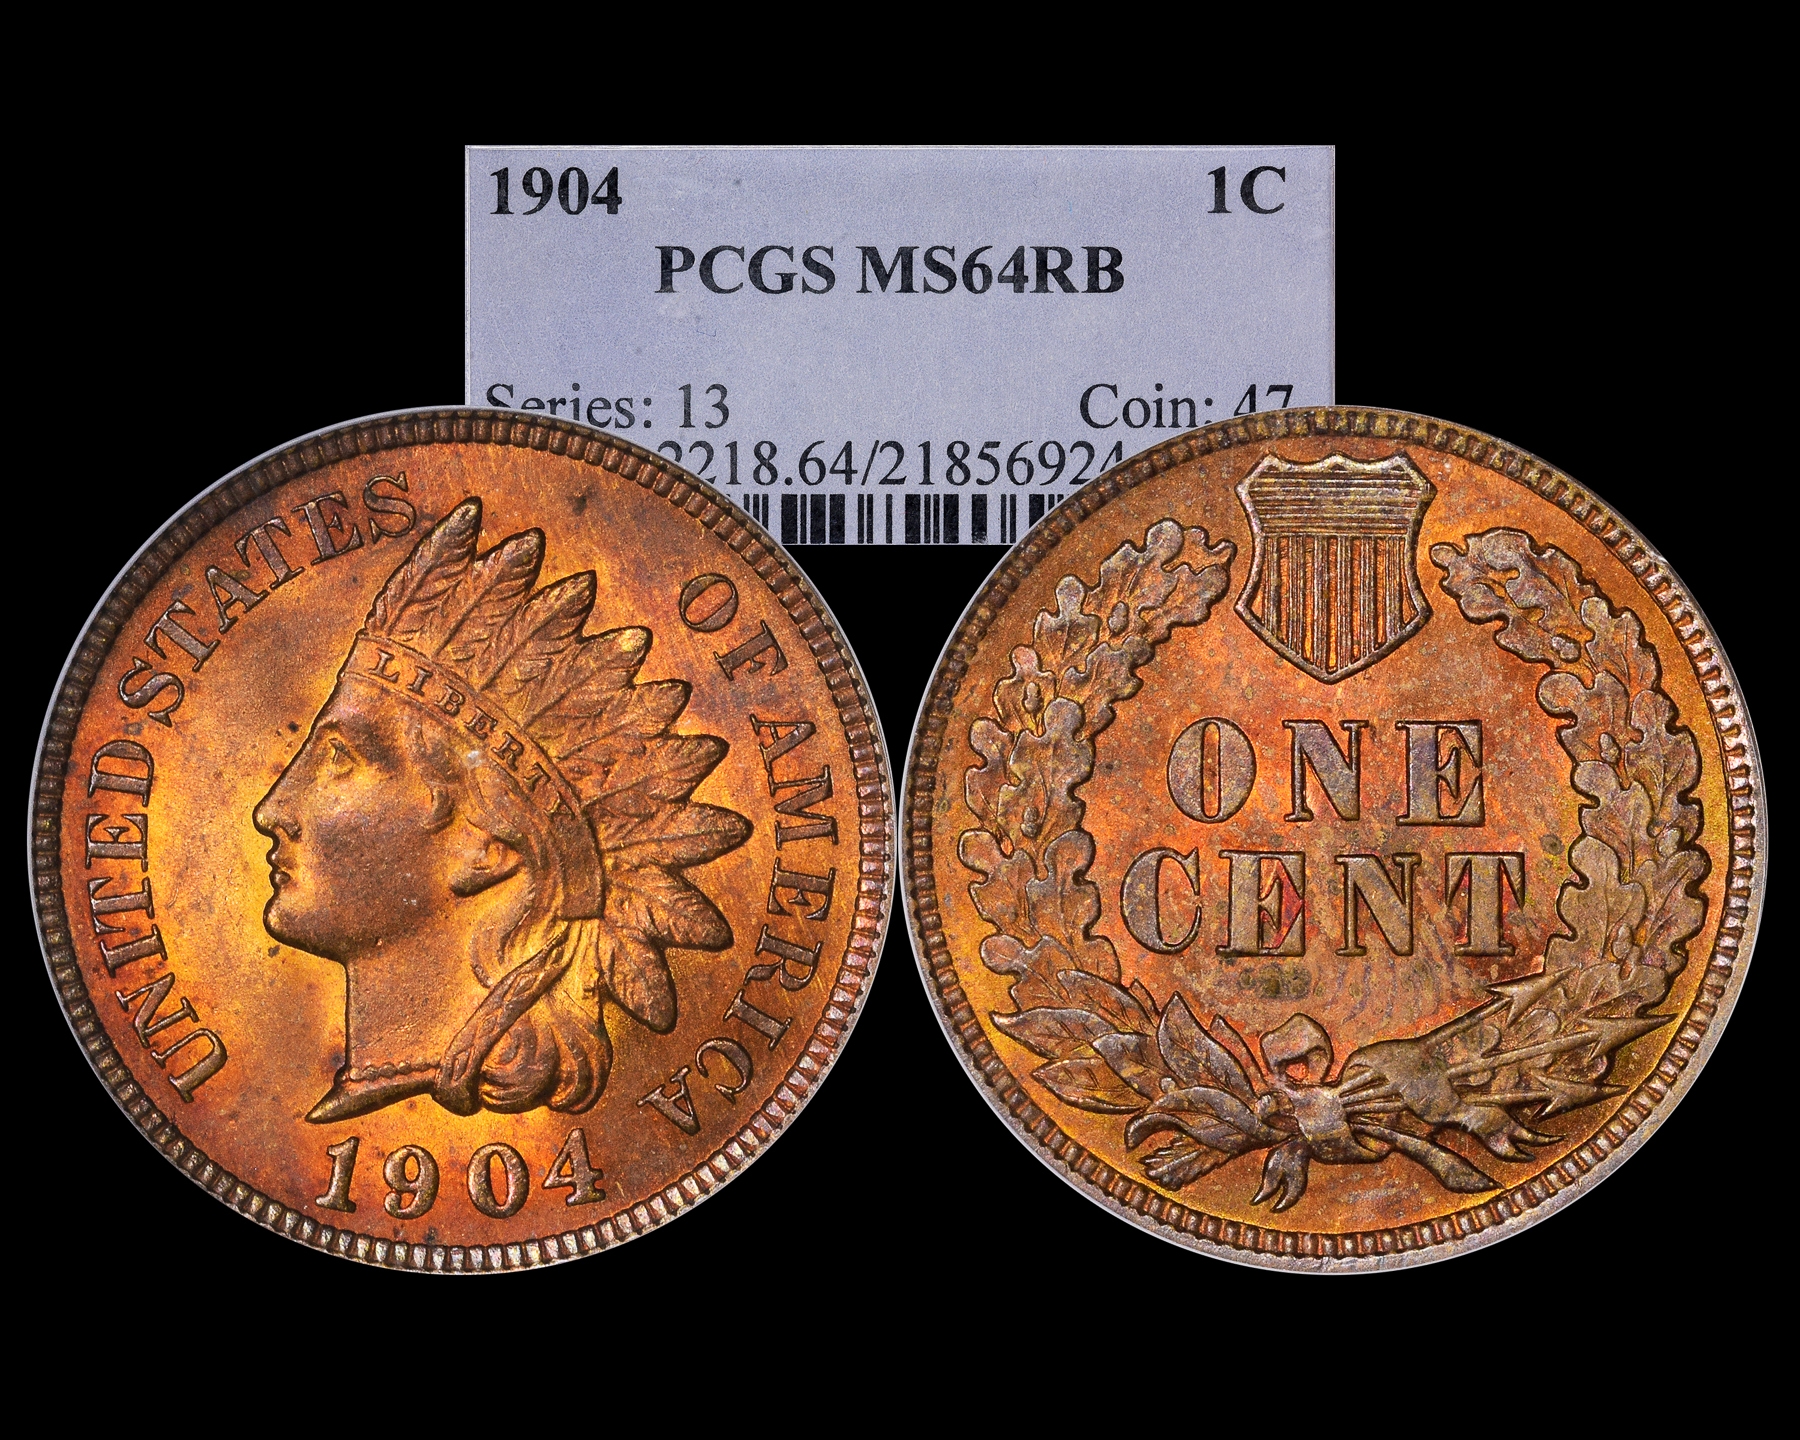 1904 1C Indian Cent PCGS MS64RB - The Penny Lady®